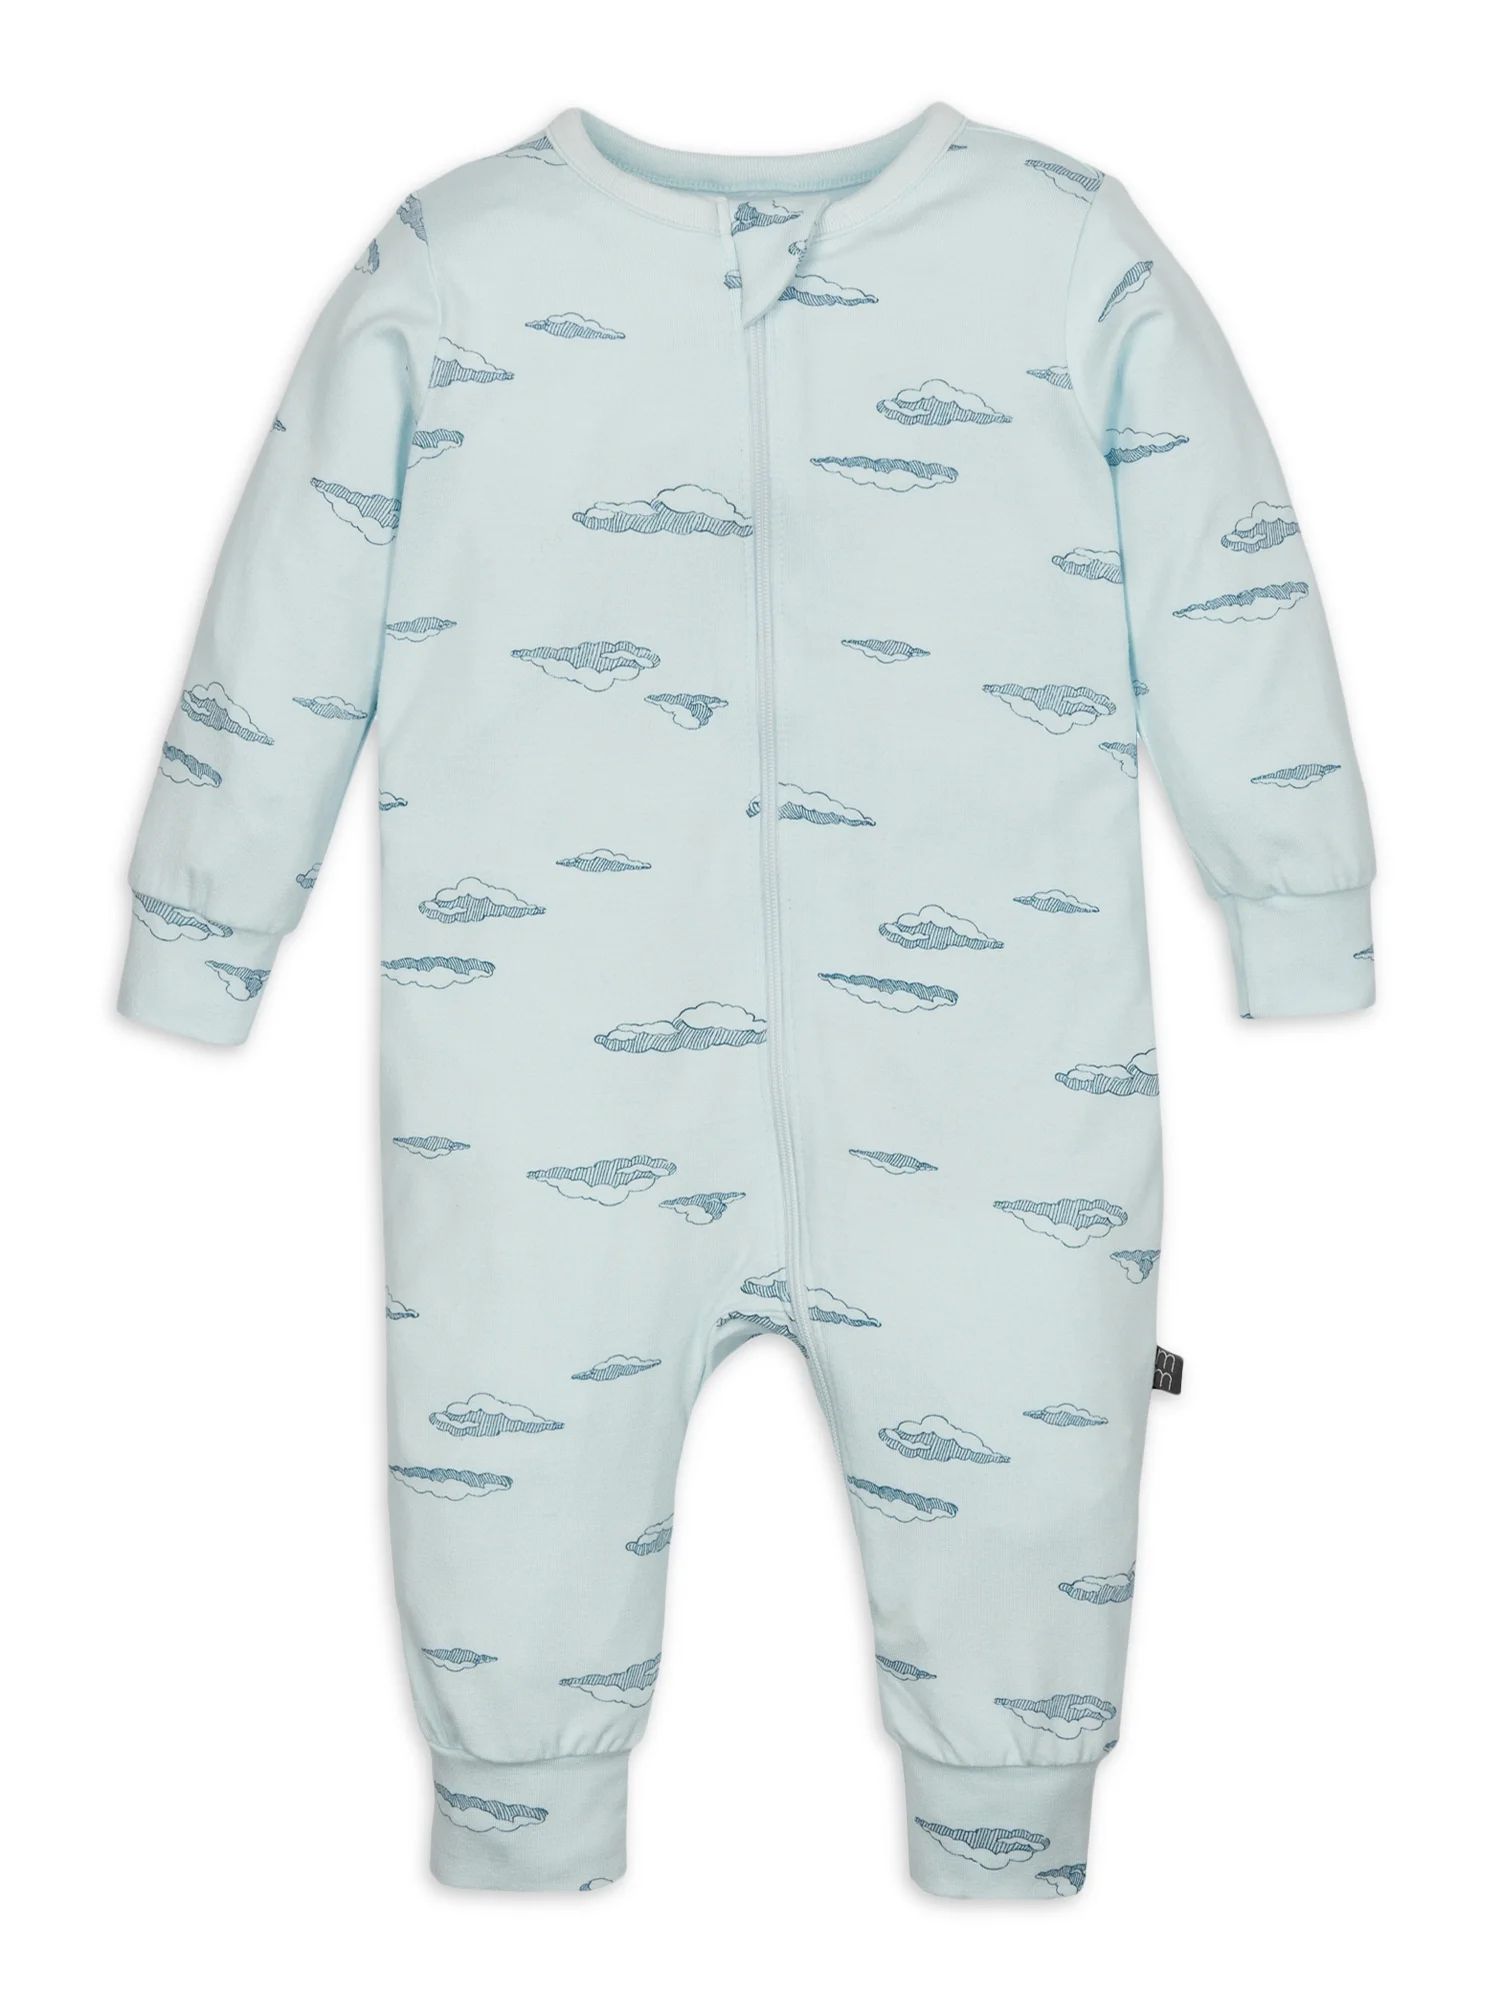 Modern Moments by Gerber Baby Unisex Super Soft Coverall, Sizes Newborn - 12 Months | Walmart (US)